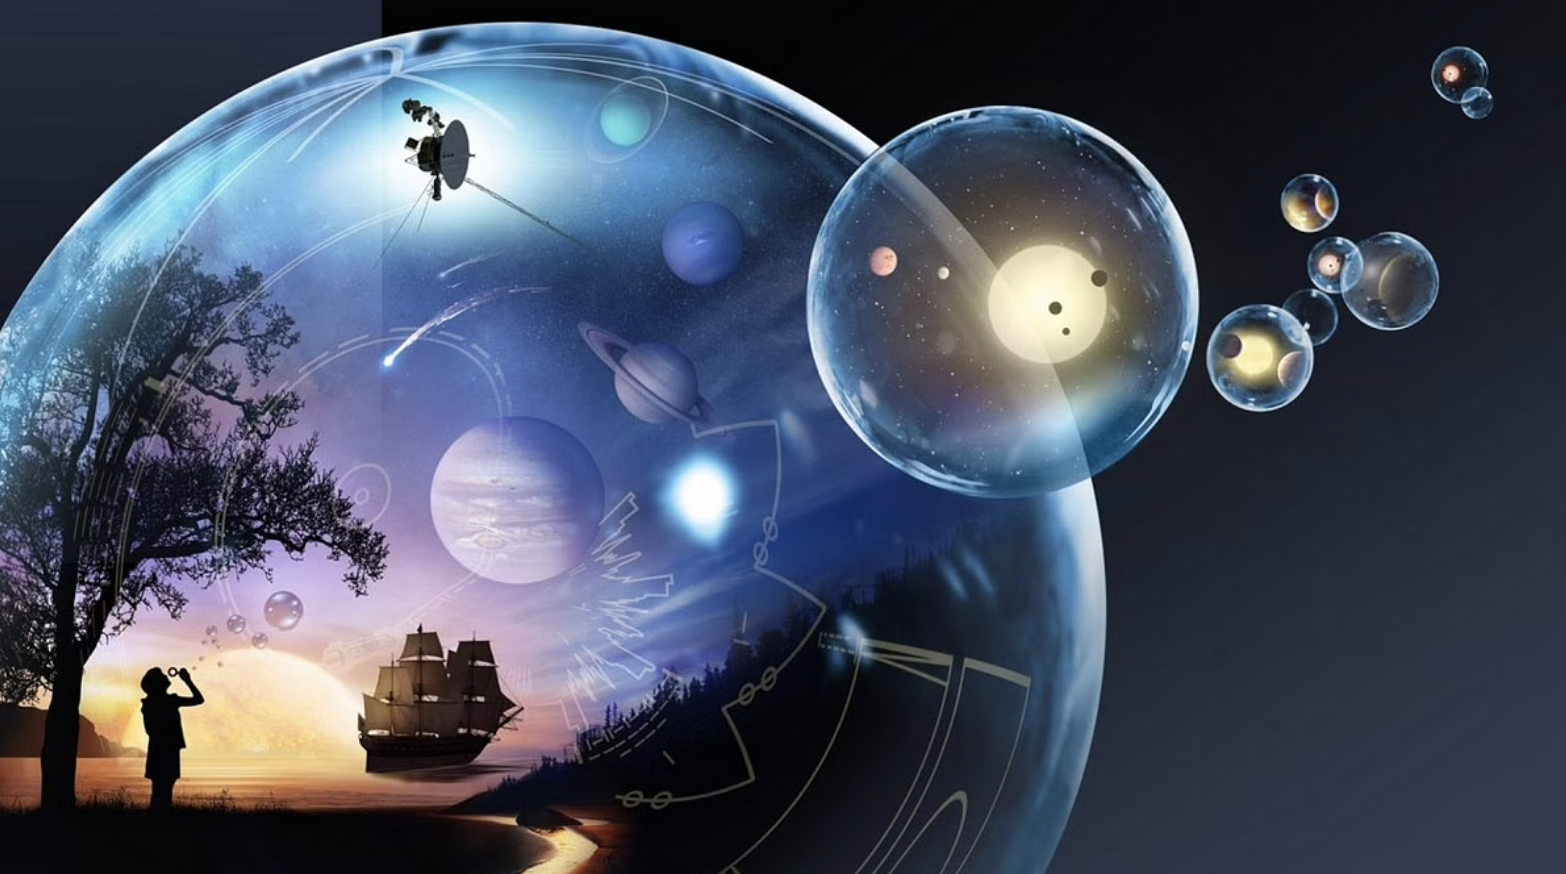 Person in fantasy image looking at a bubble world in space